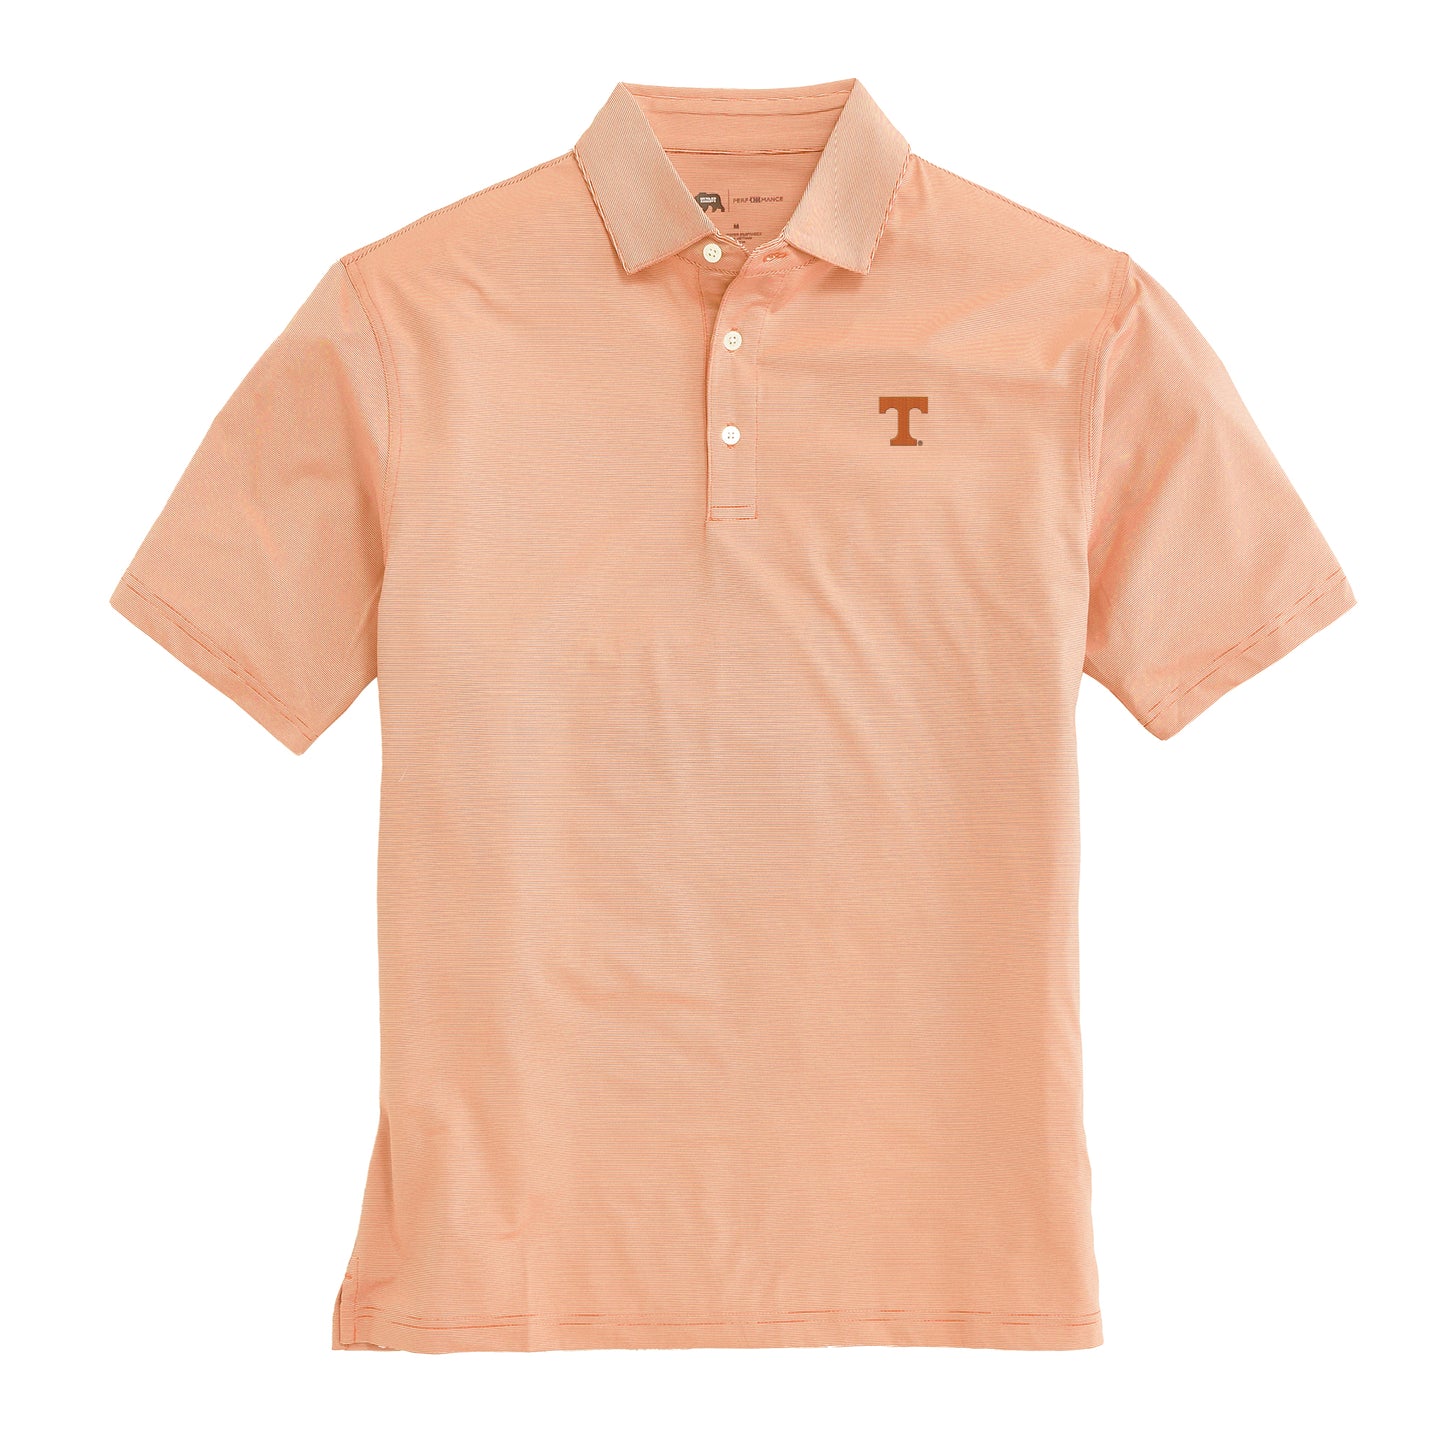 University of Tennessee Hairline Stripe Performance Polo